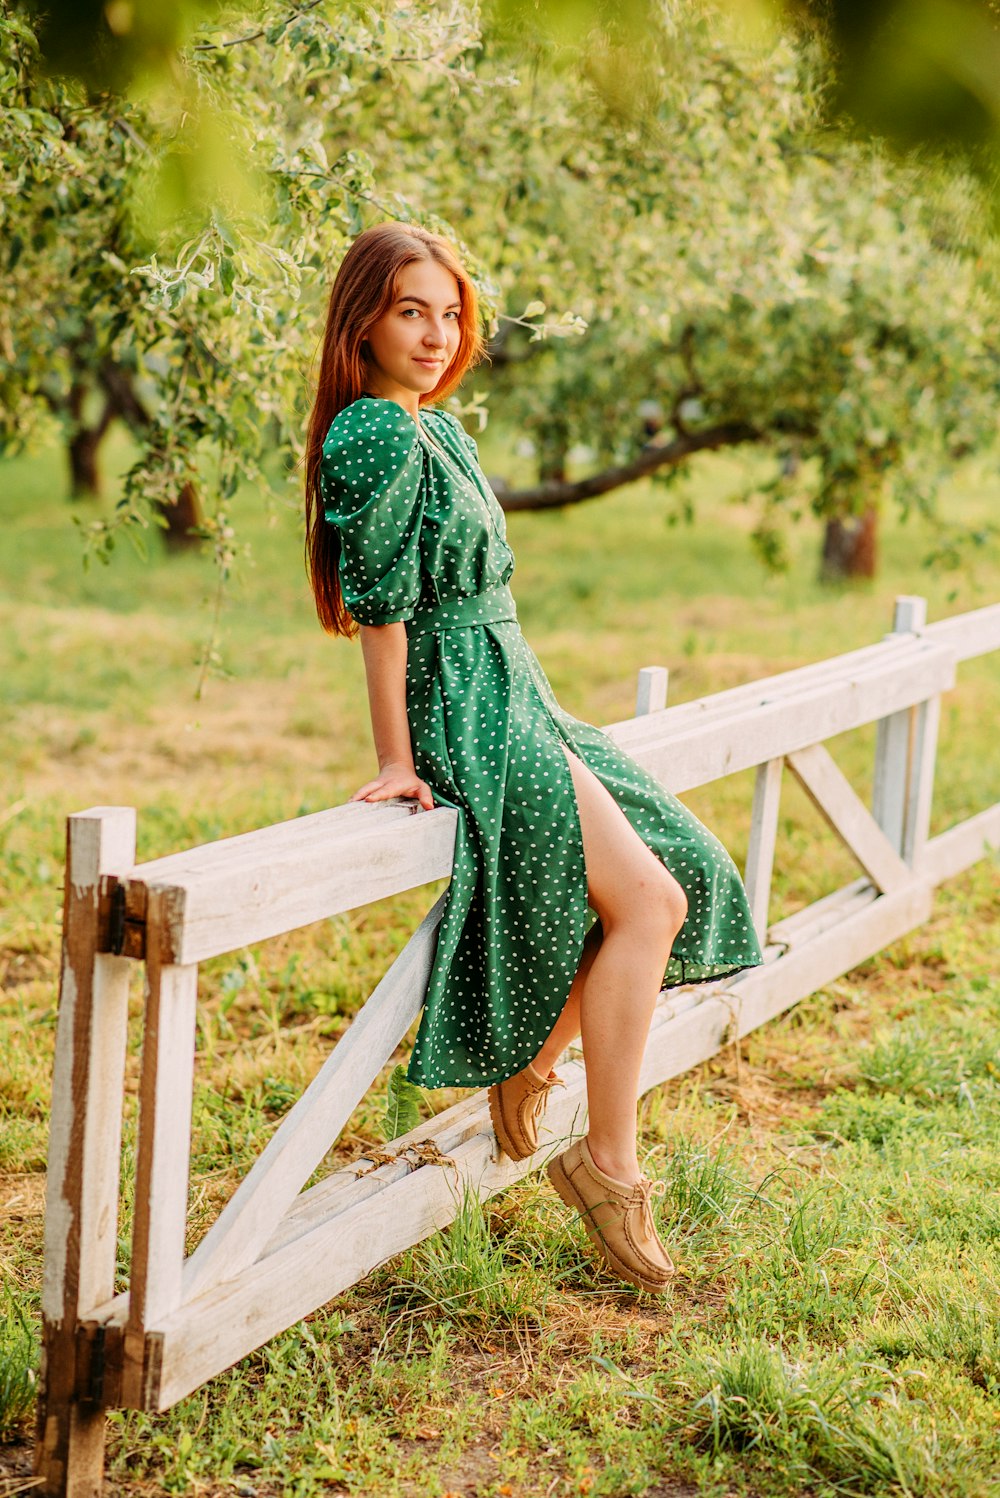 woman in green dress standing on brown wooden bridge during daytime